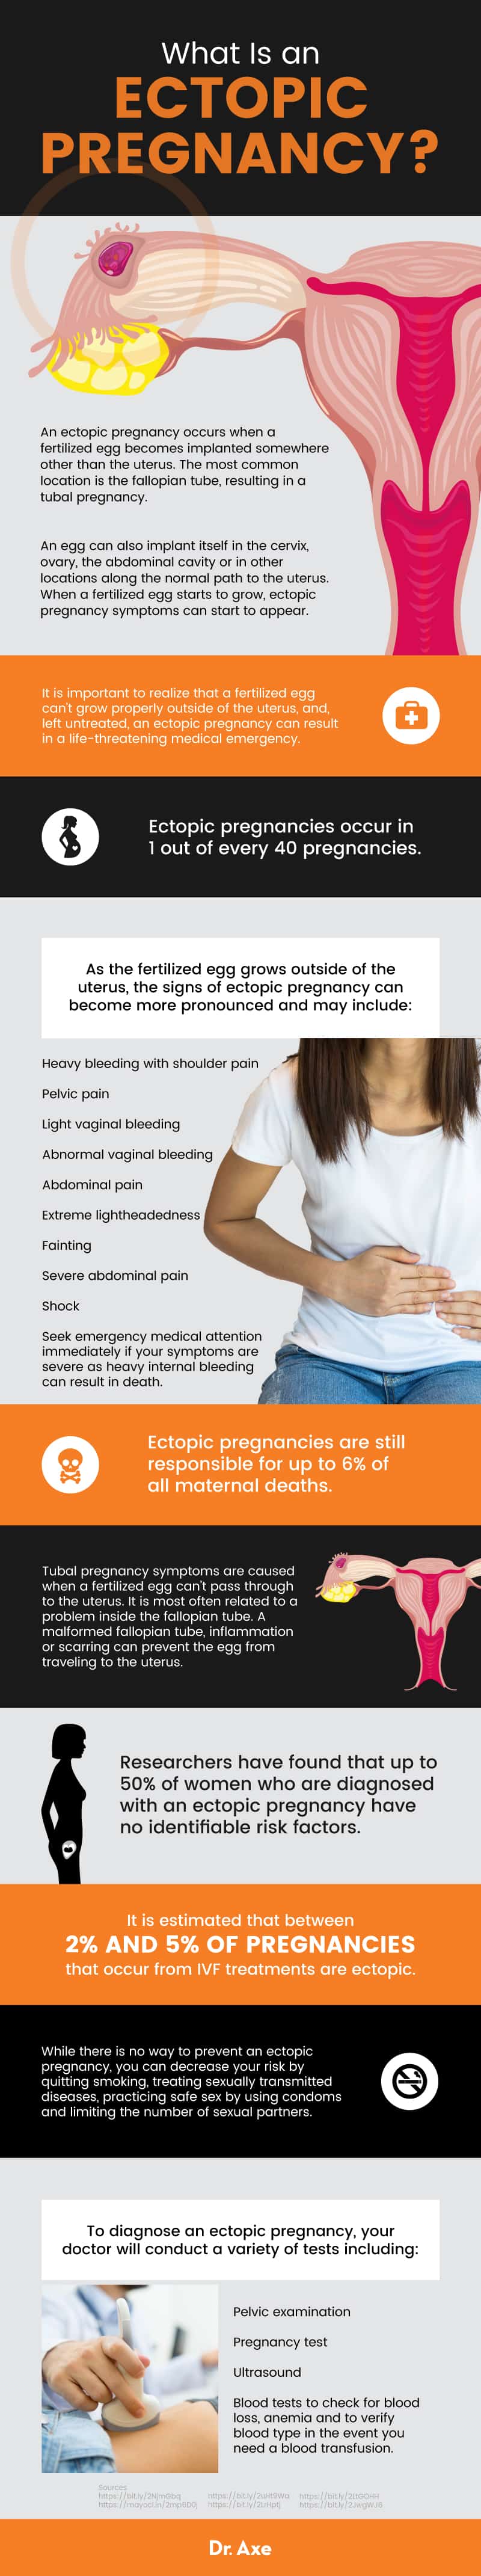 What is an ectopic pregnancy? - Dr. Axe